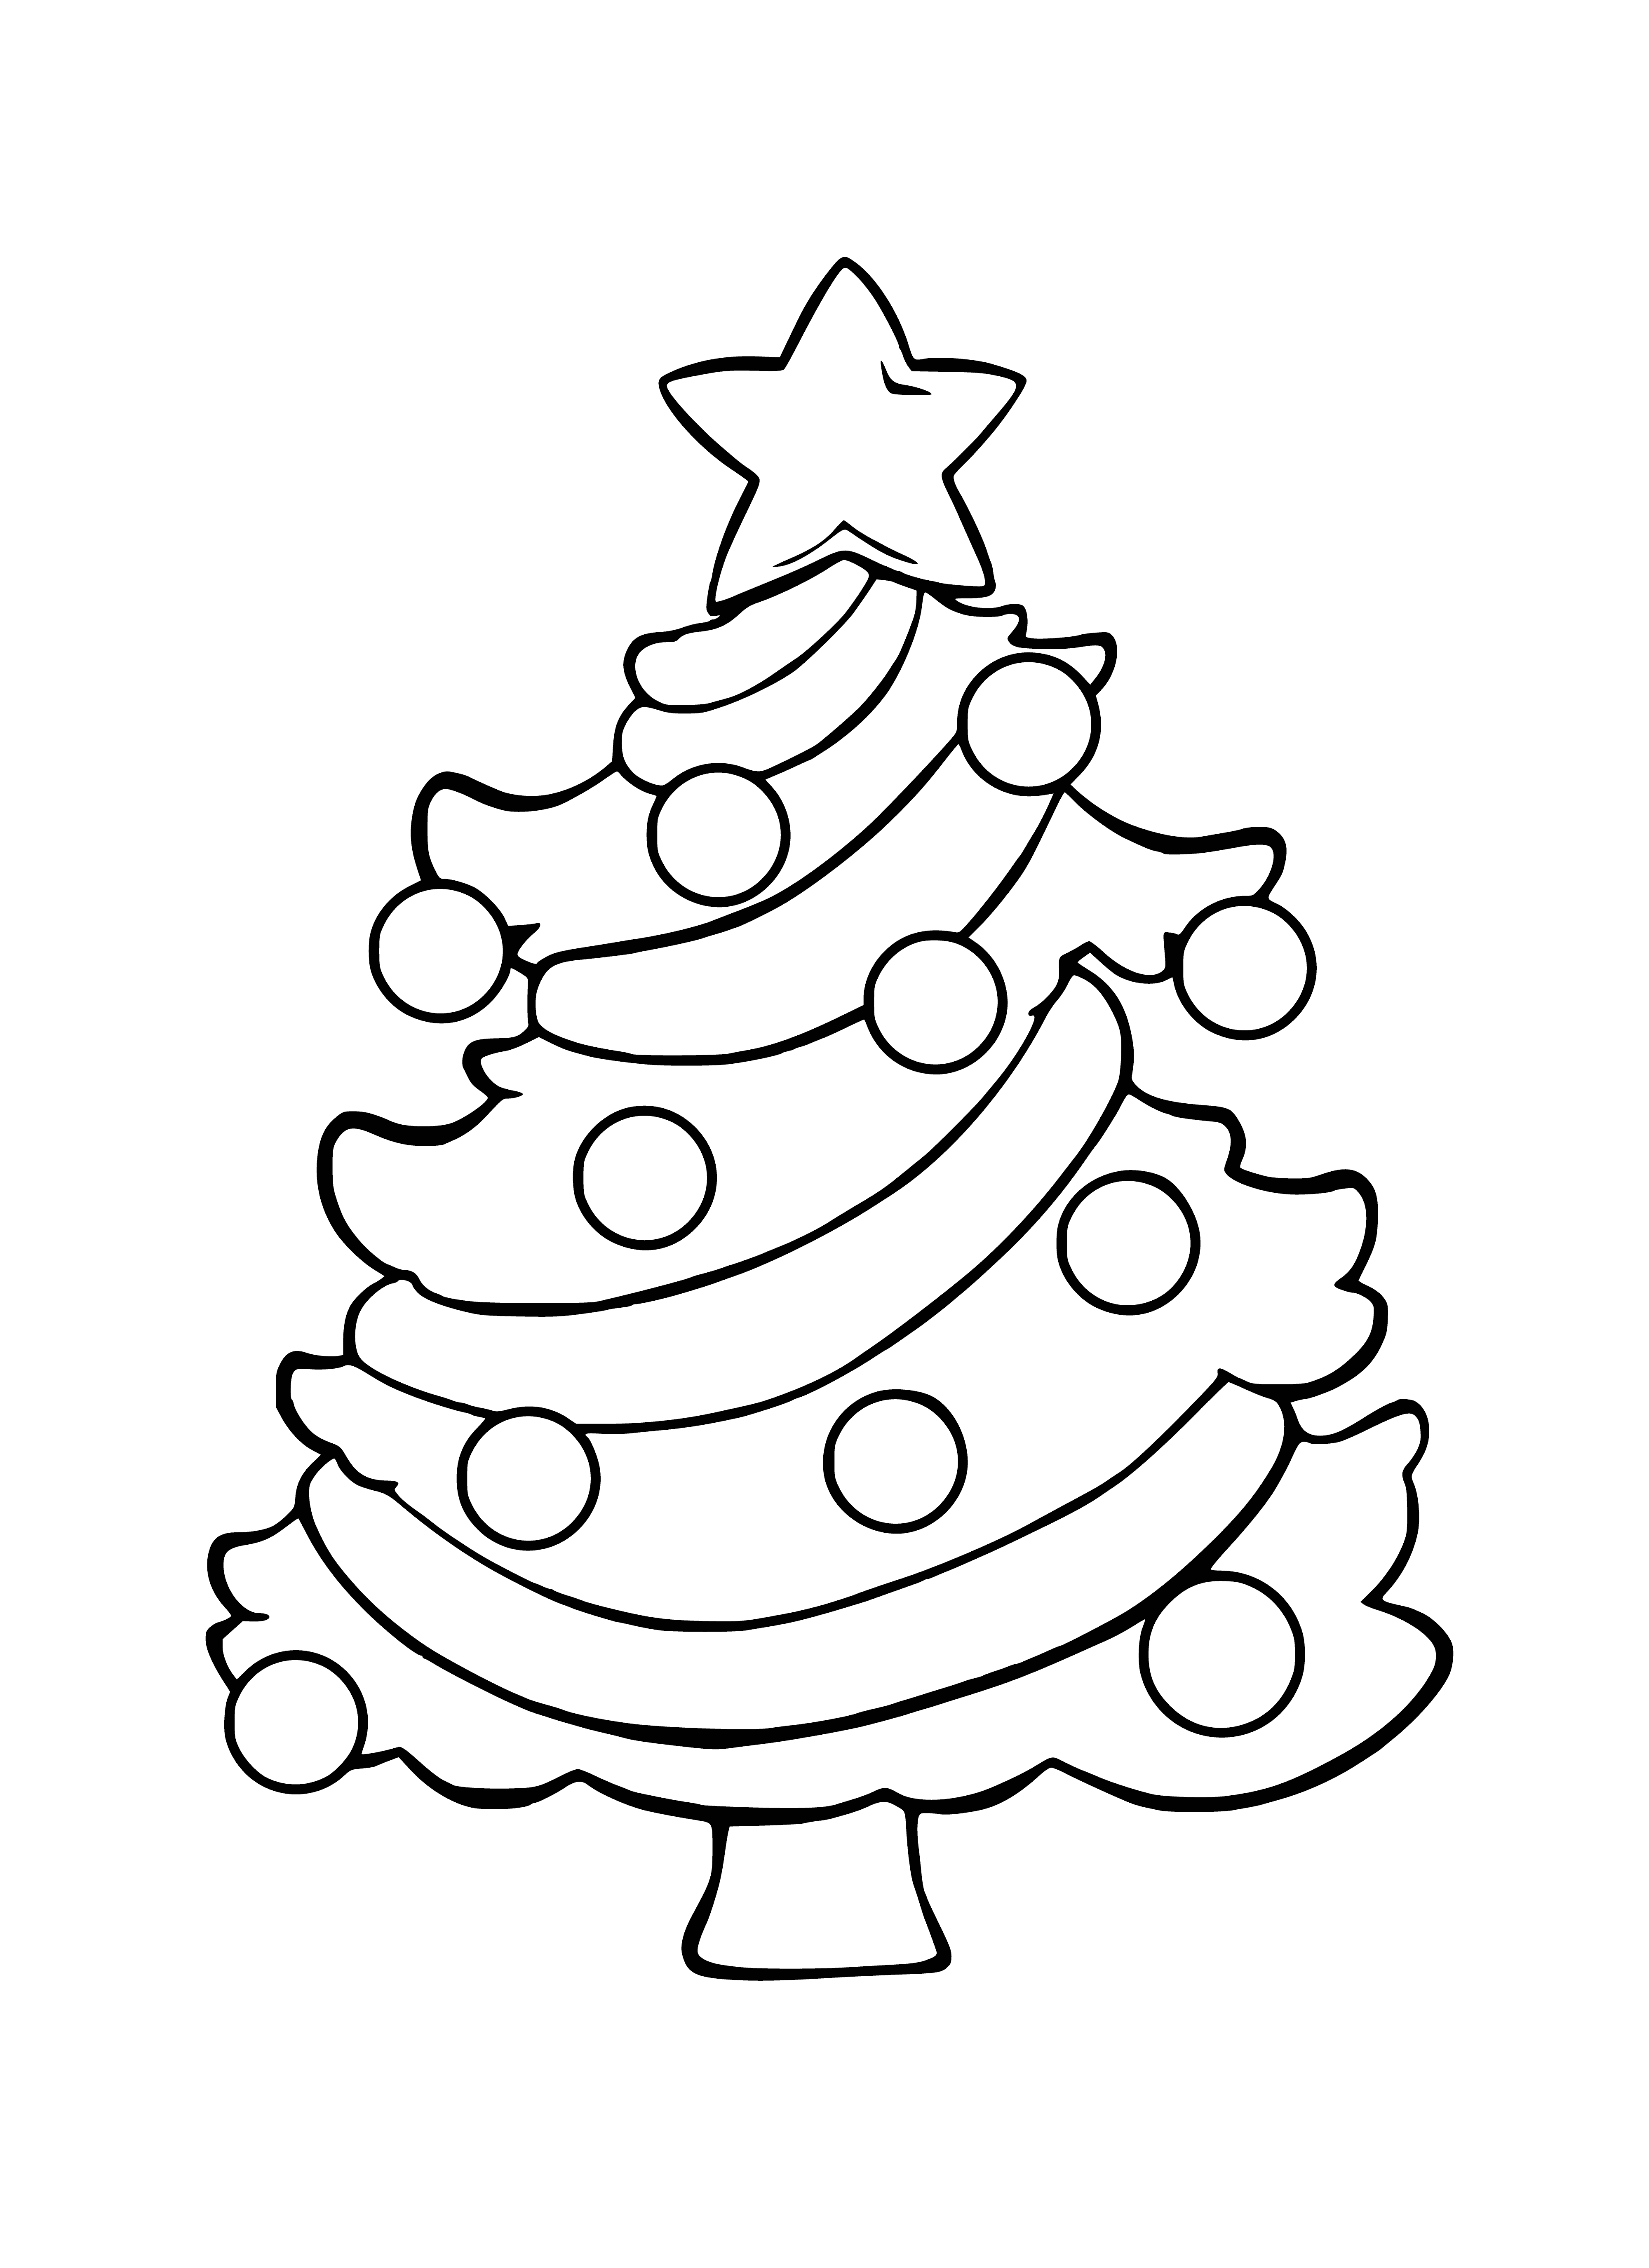 coloring page: A Christmas tree with lights, a star, and presents beneath.